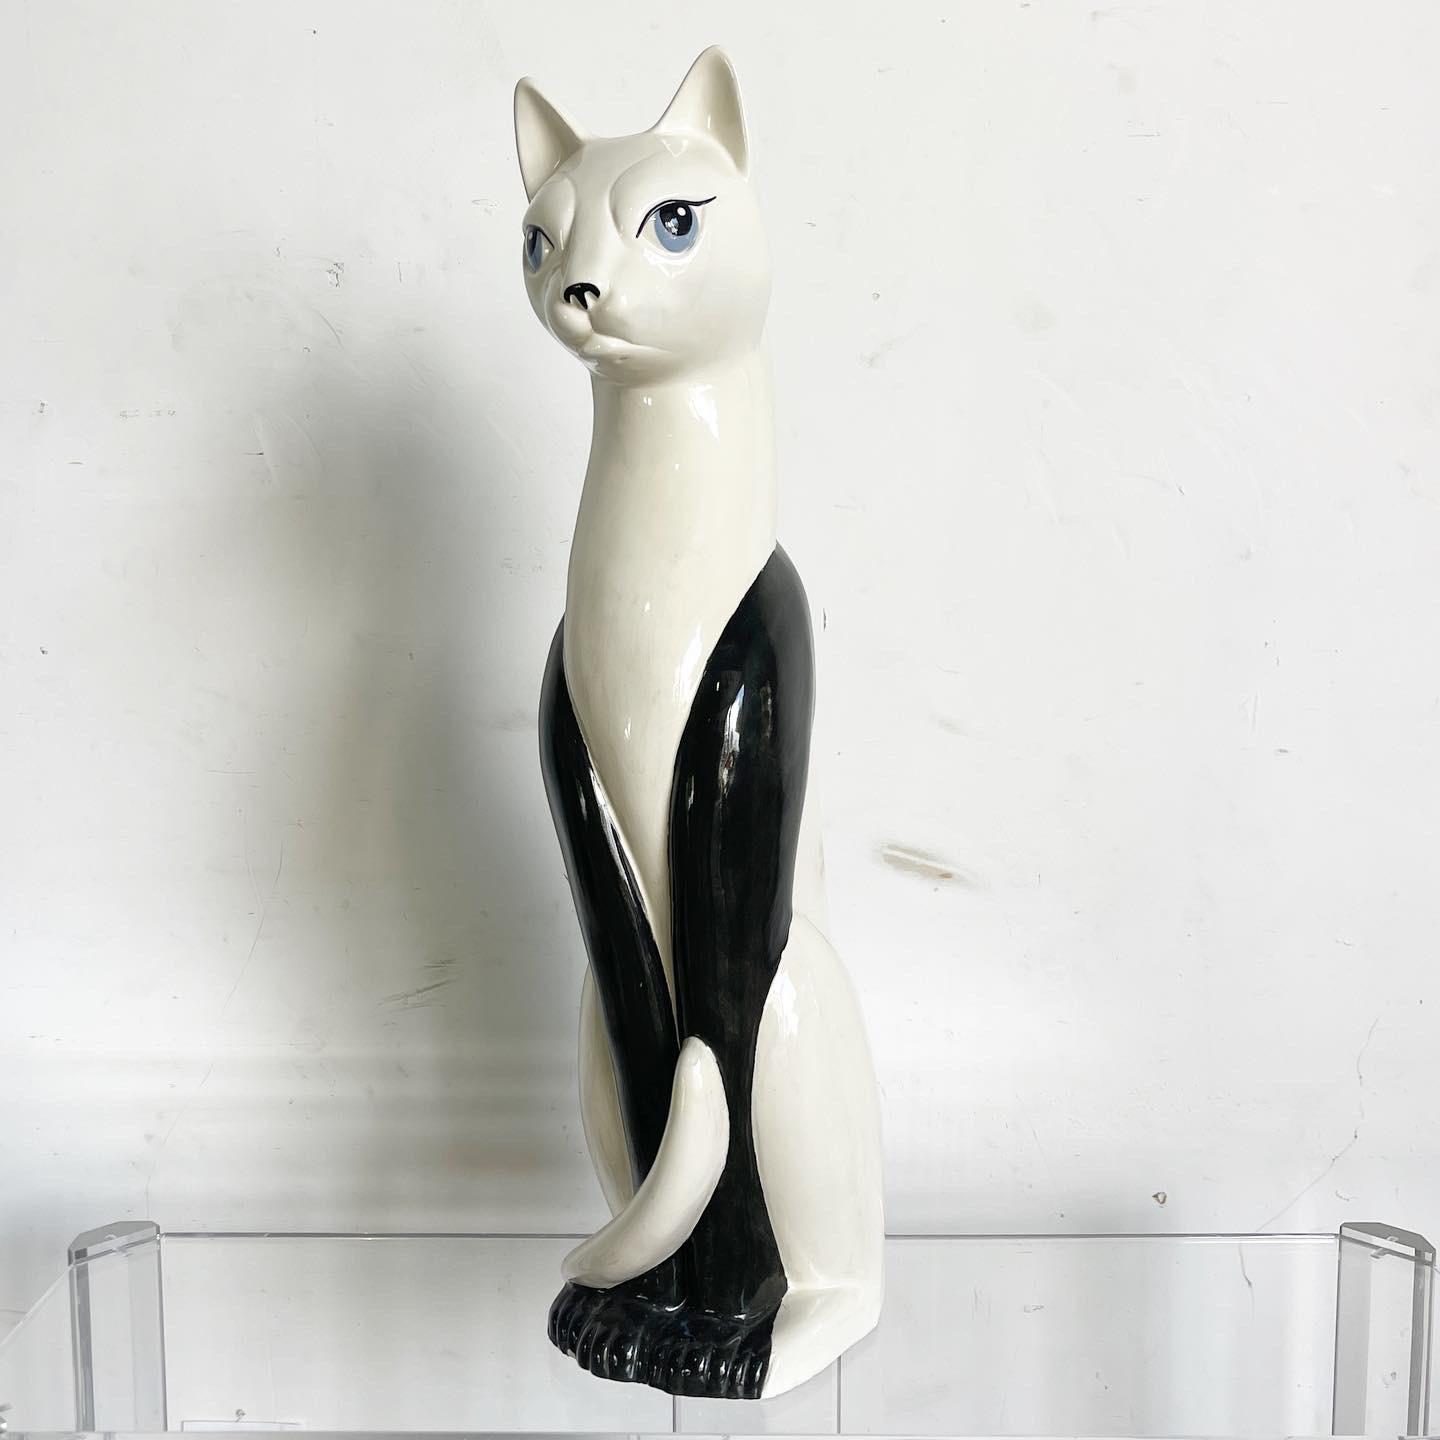 Vintage Blue and White Chinoiserie Cat Figurine